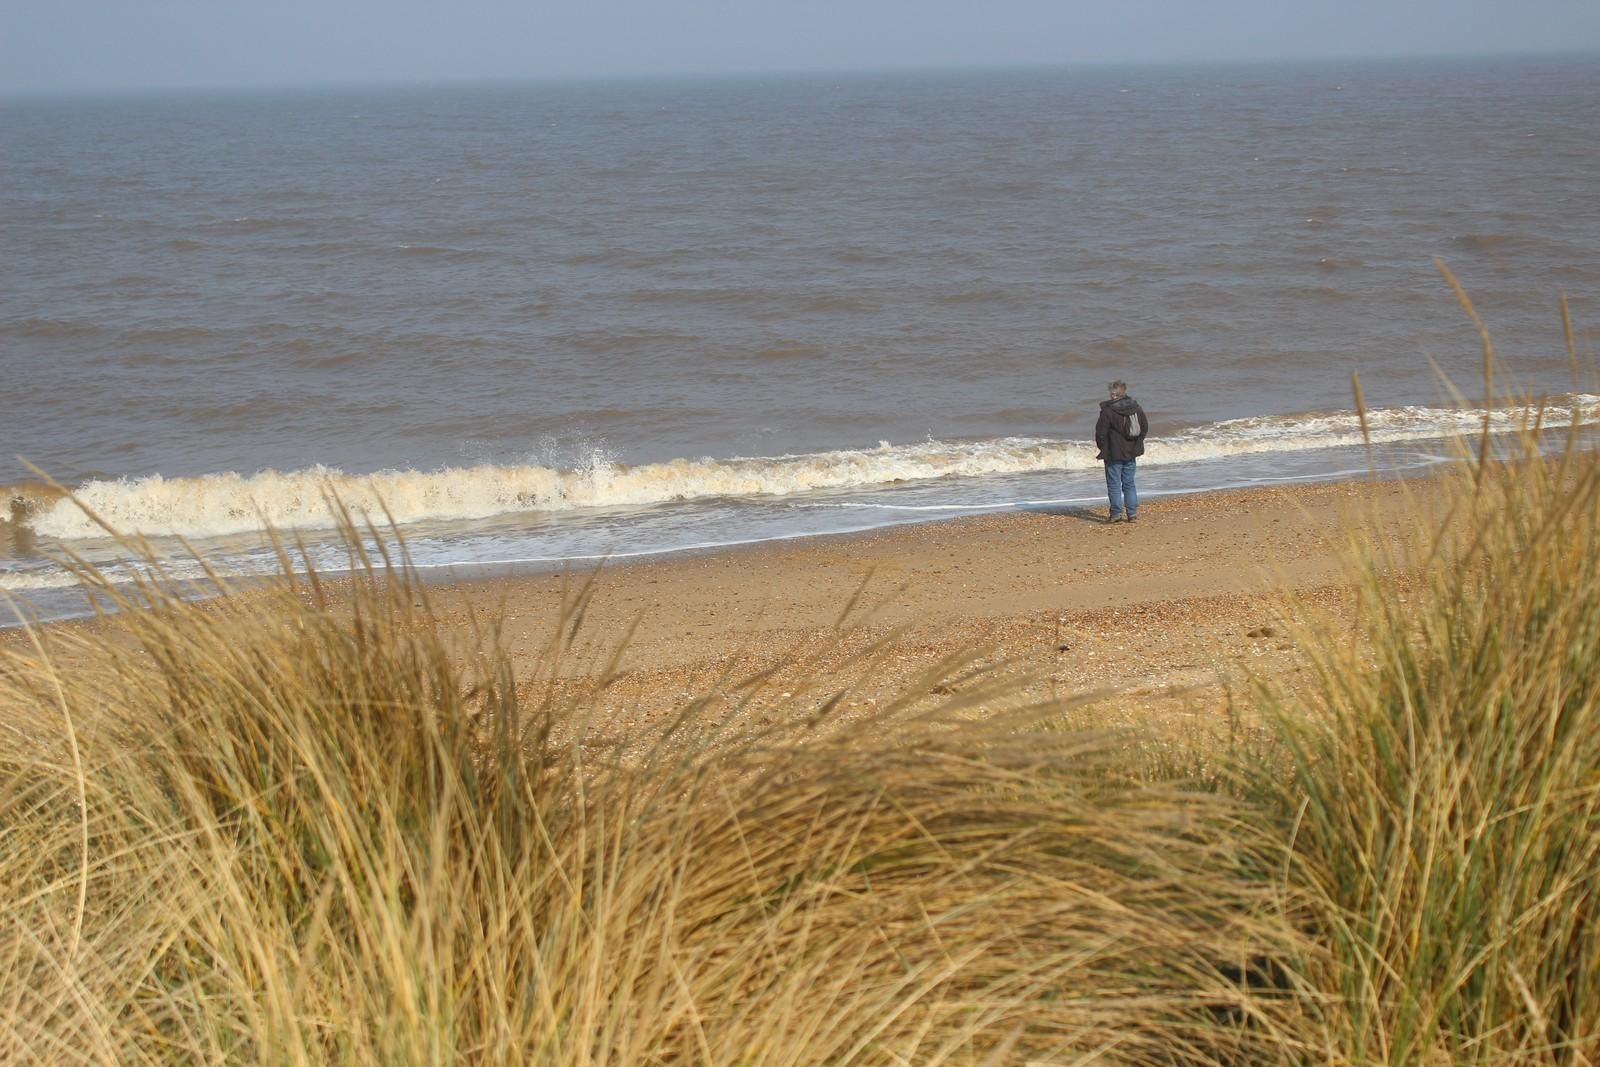 Man Contemplating while watching the waves roll to the sandy shore with a view through the sand dunes